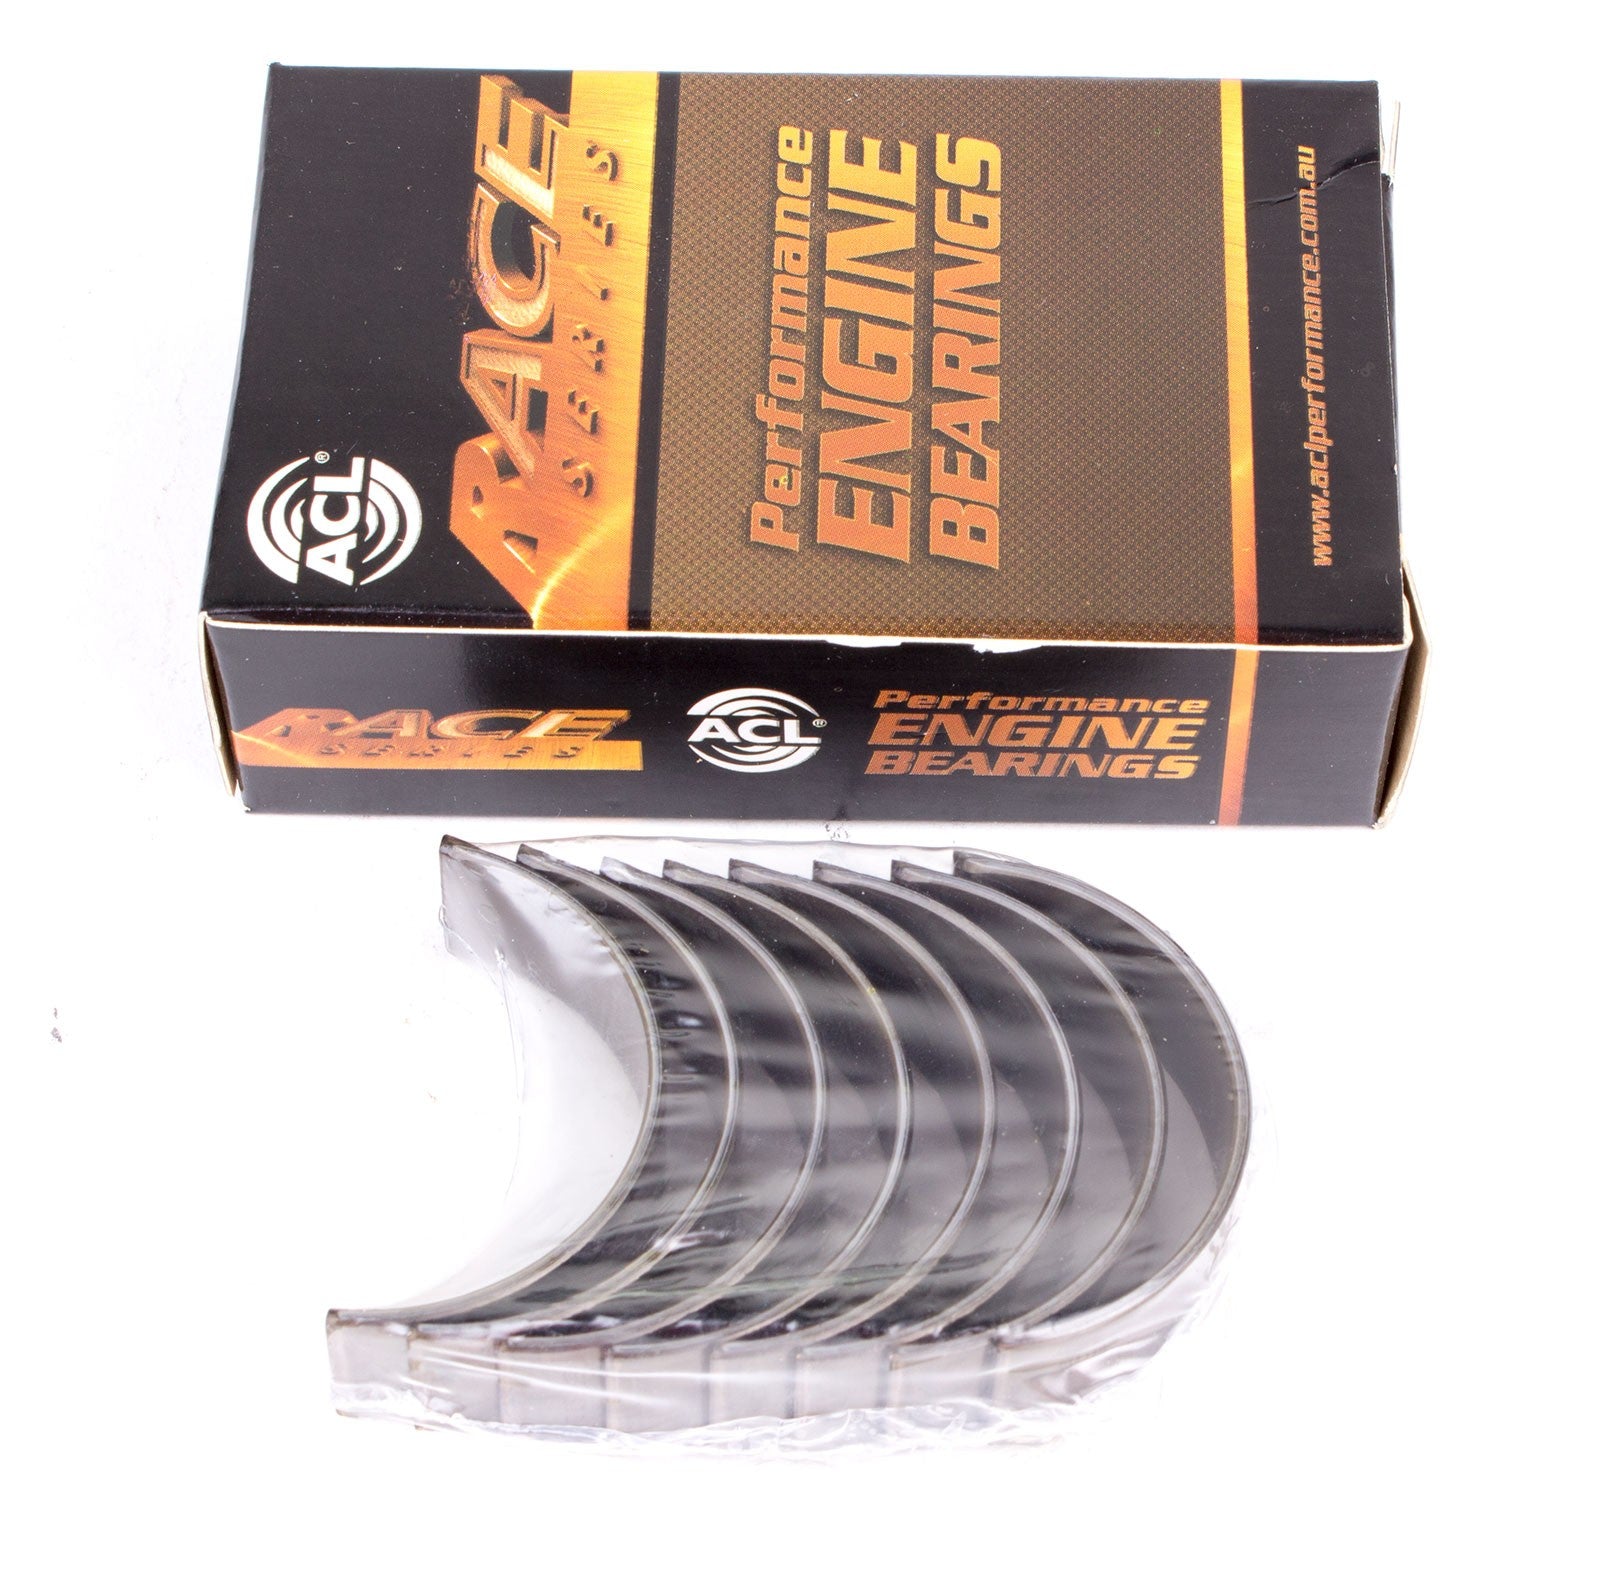 ACL 5M5563H-.025 Main bearing set (ACL Race Series) Photo-0 